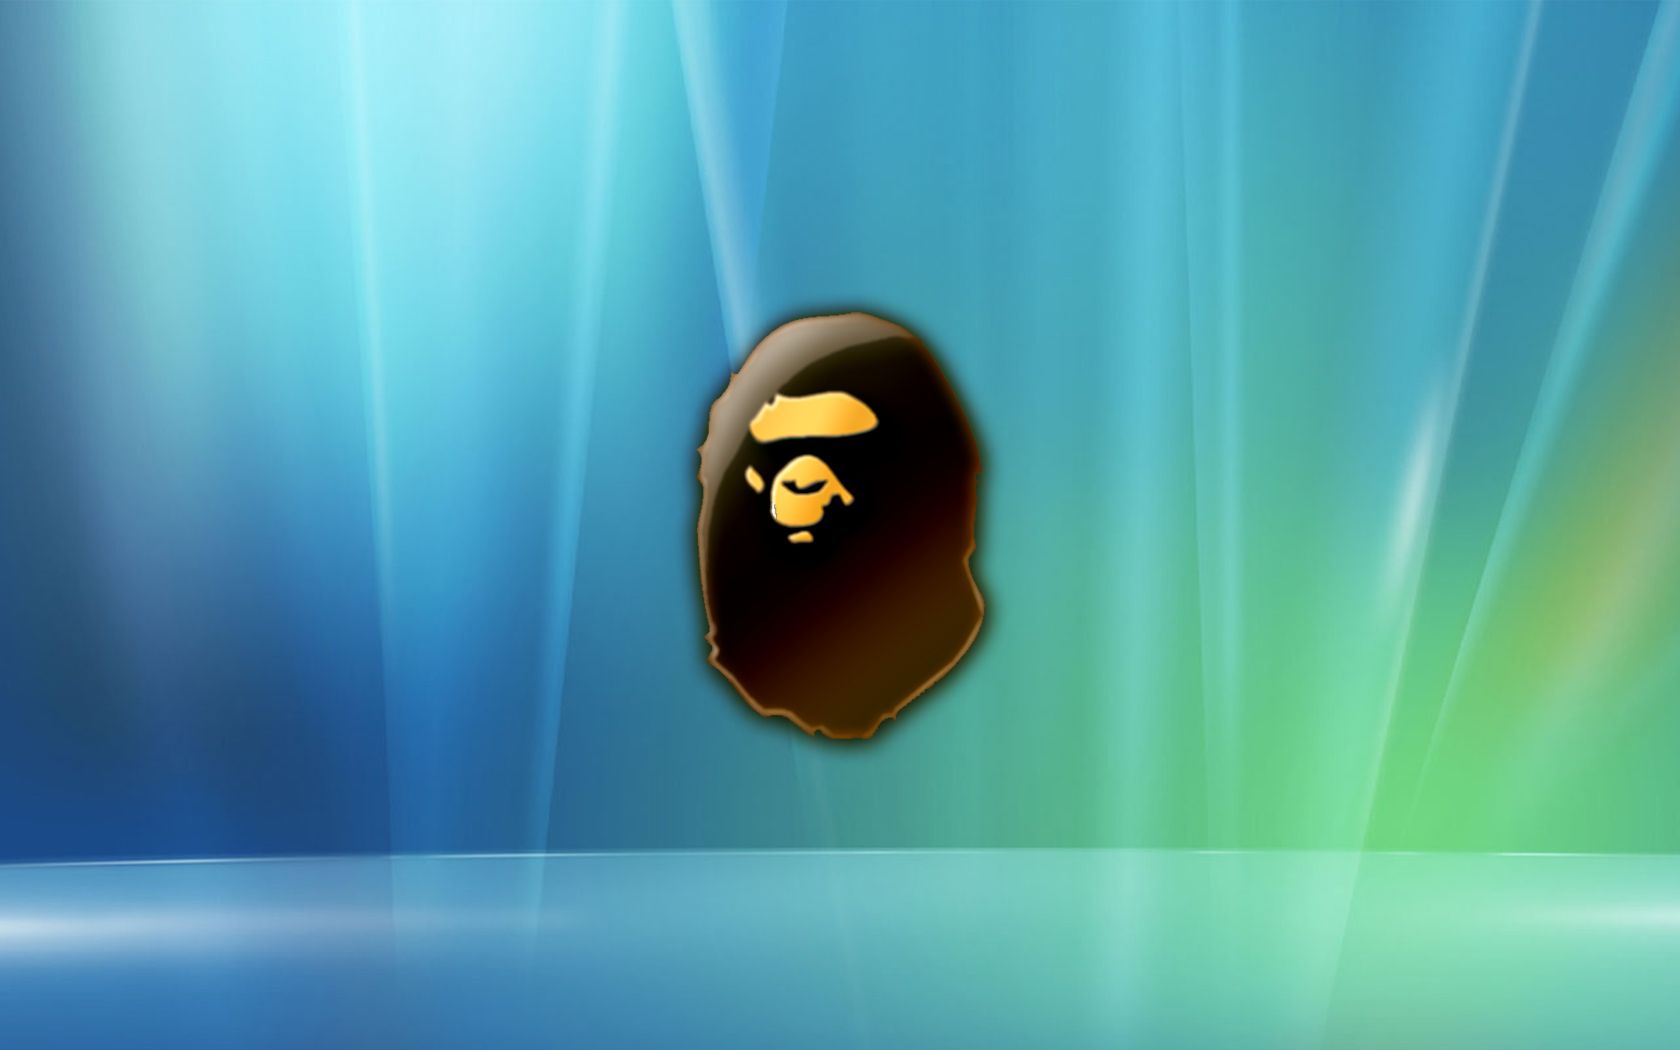 BAPE Wallpaper with Shark Face on Camo Background  Wallpapers Clan